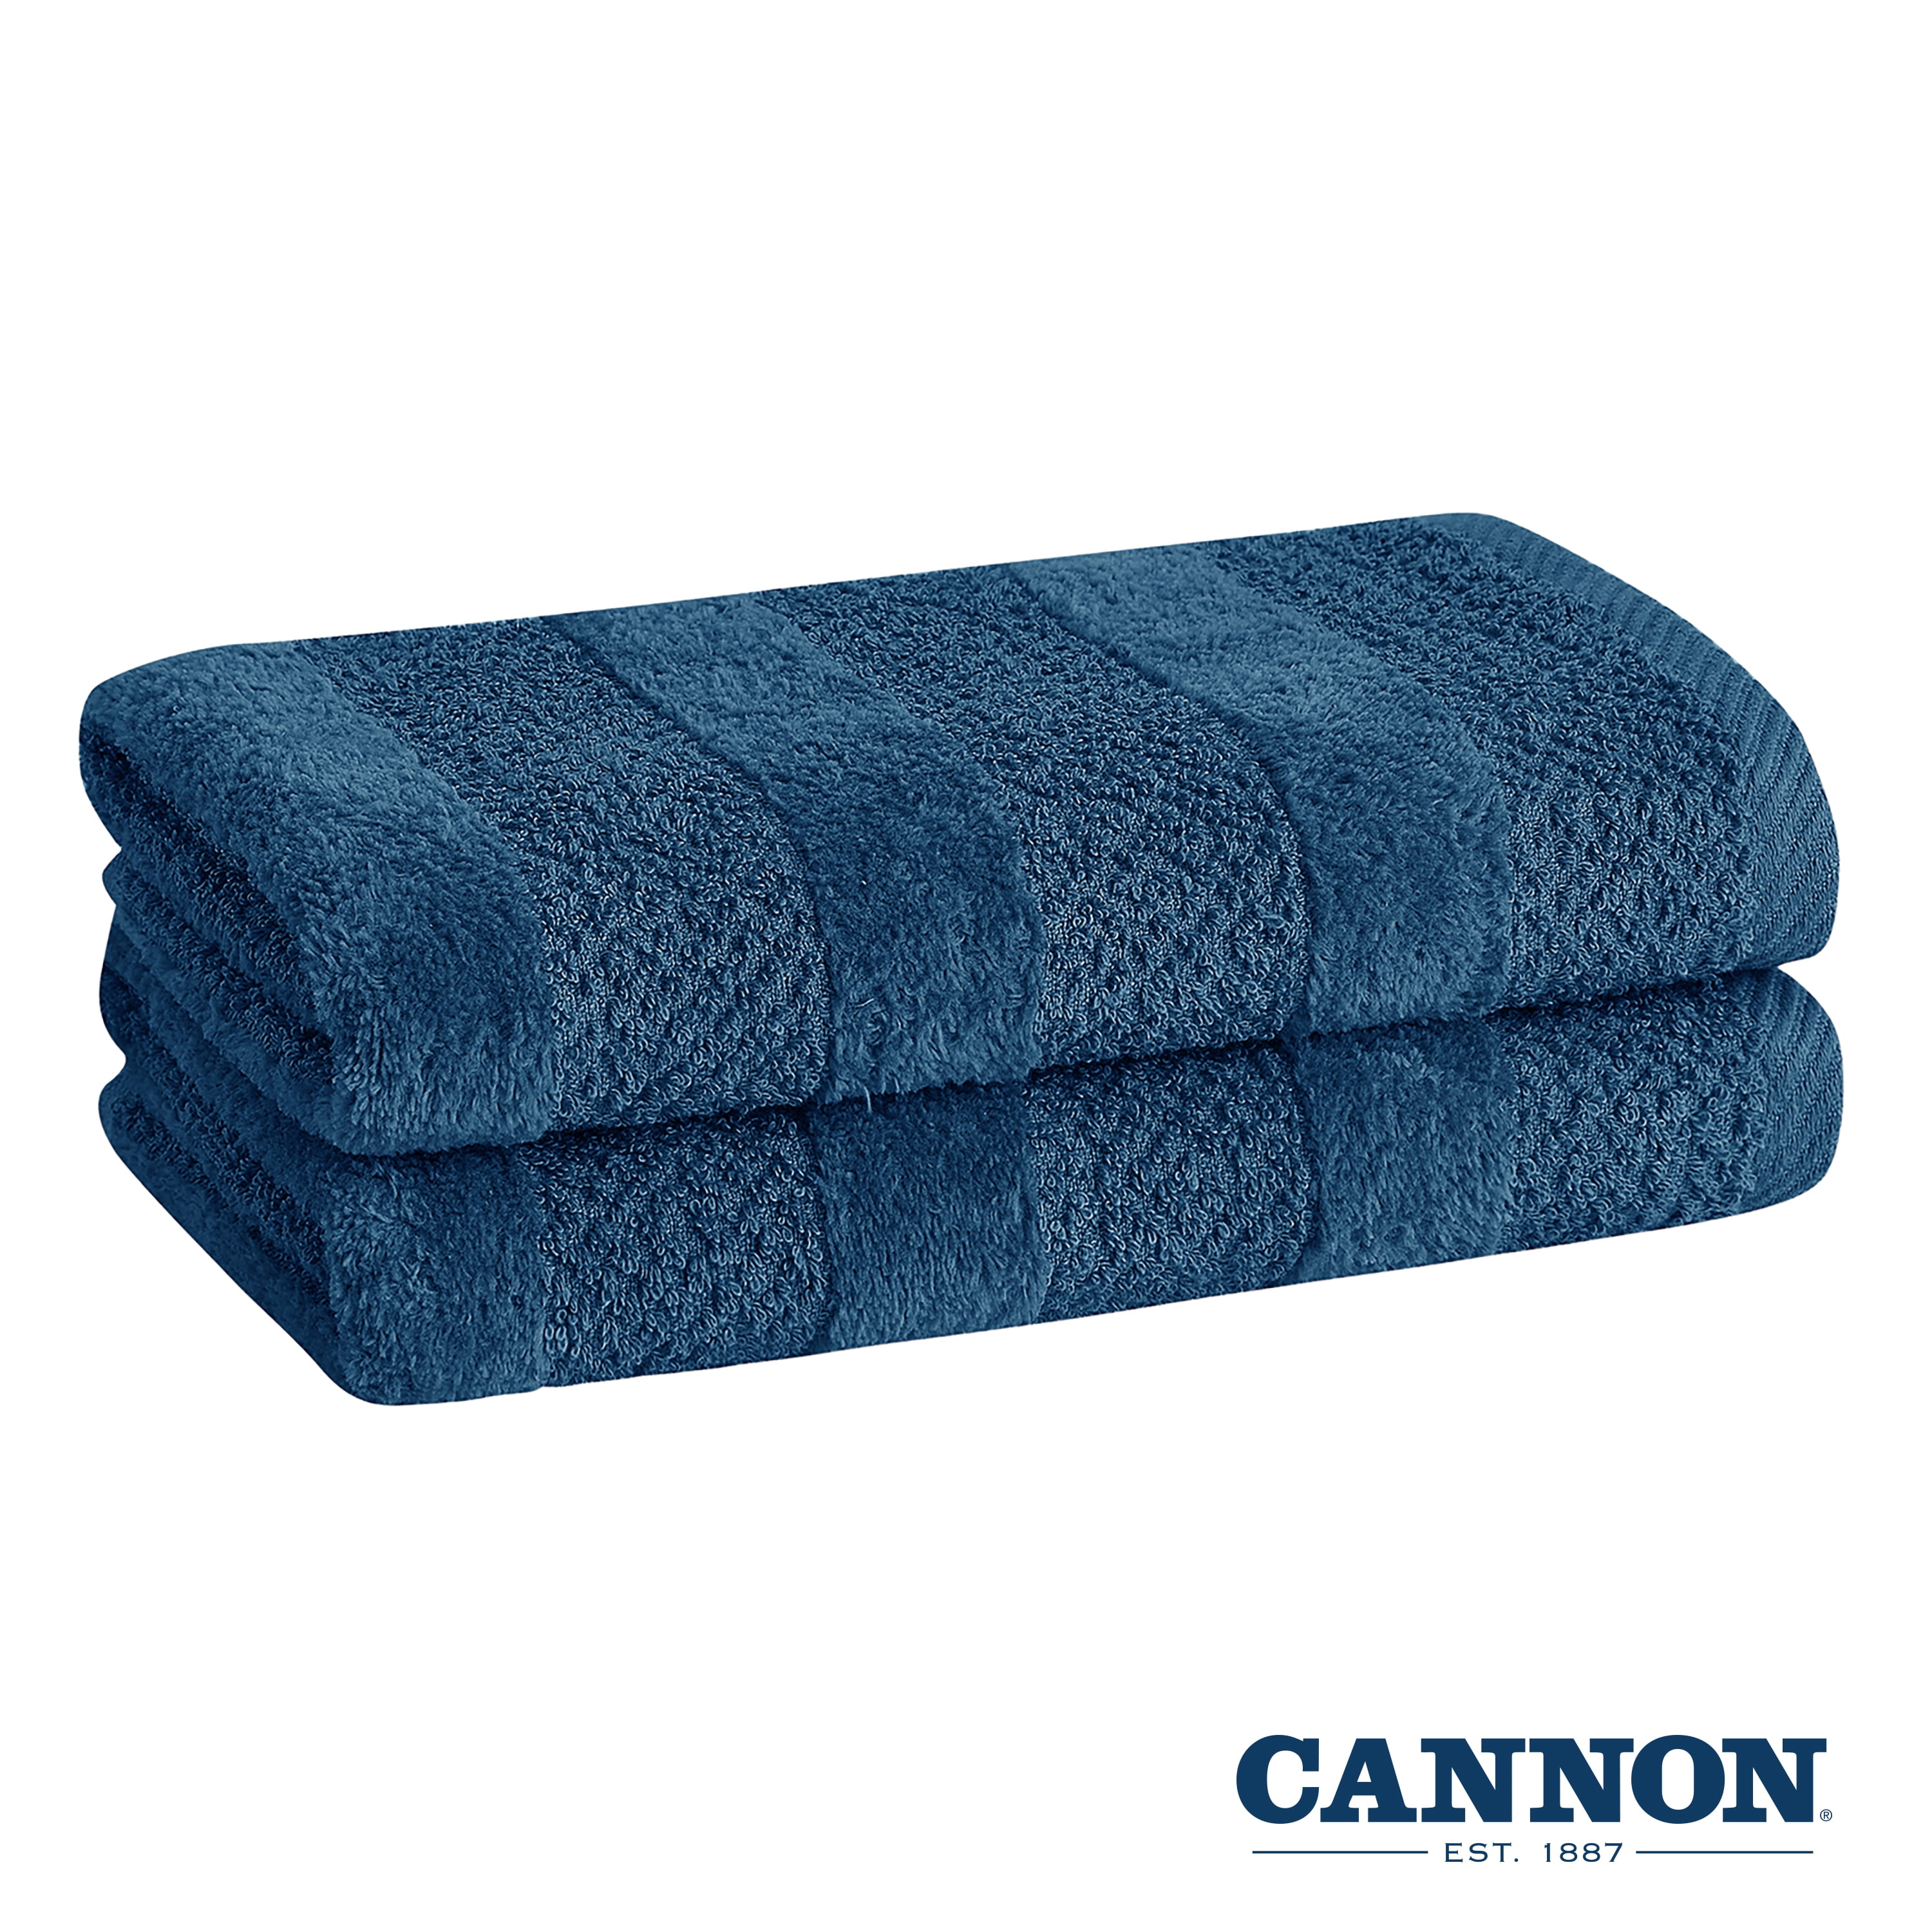 CANNON 100% Cotton Low Twist Hand Towels (16 L x 28 W), 550 GSM, Highly  Absorbent, Super Soft and Fluffy (2 Pack, White)